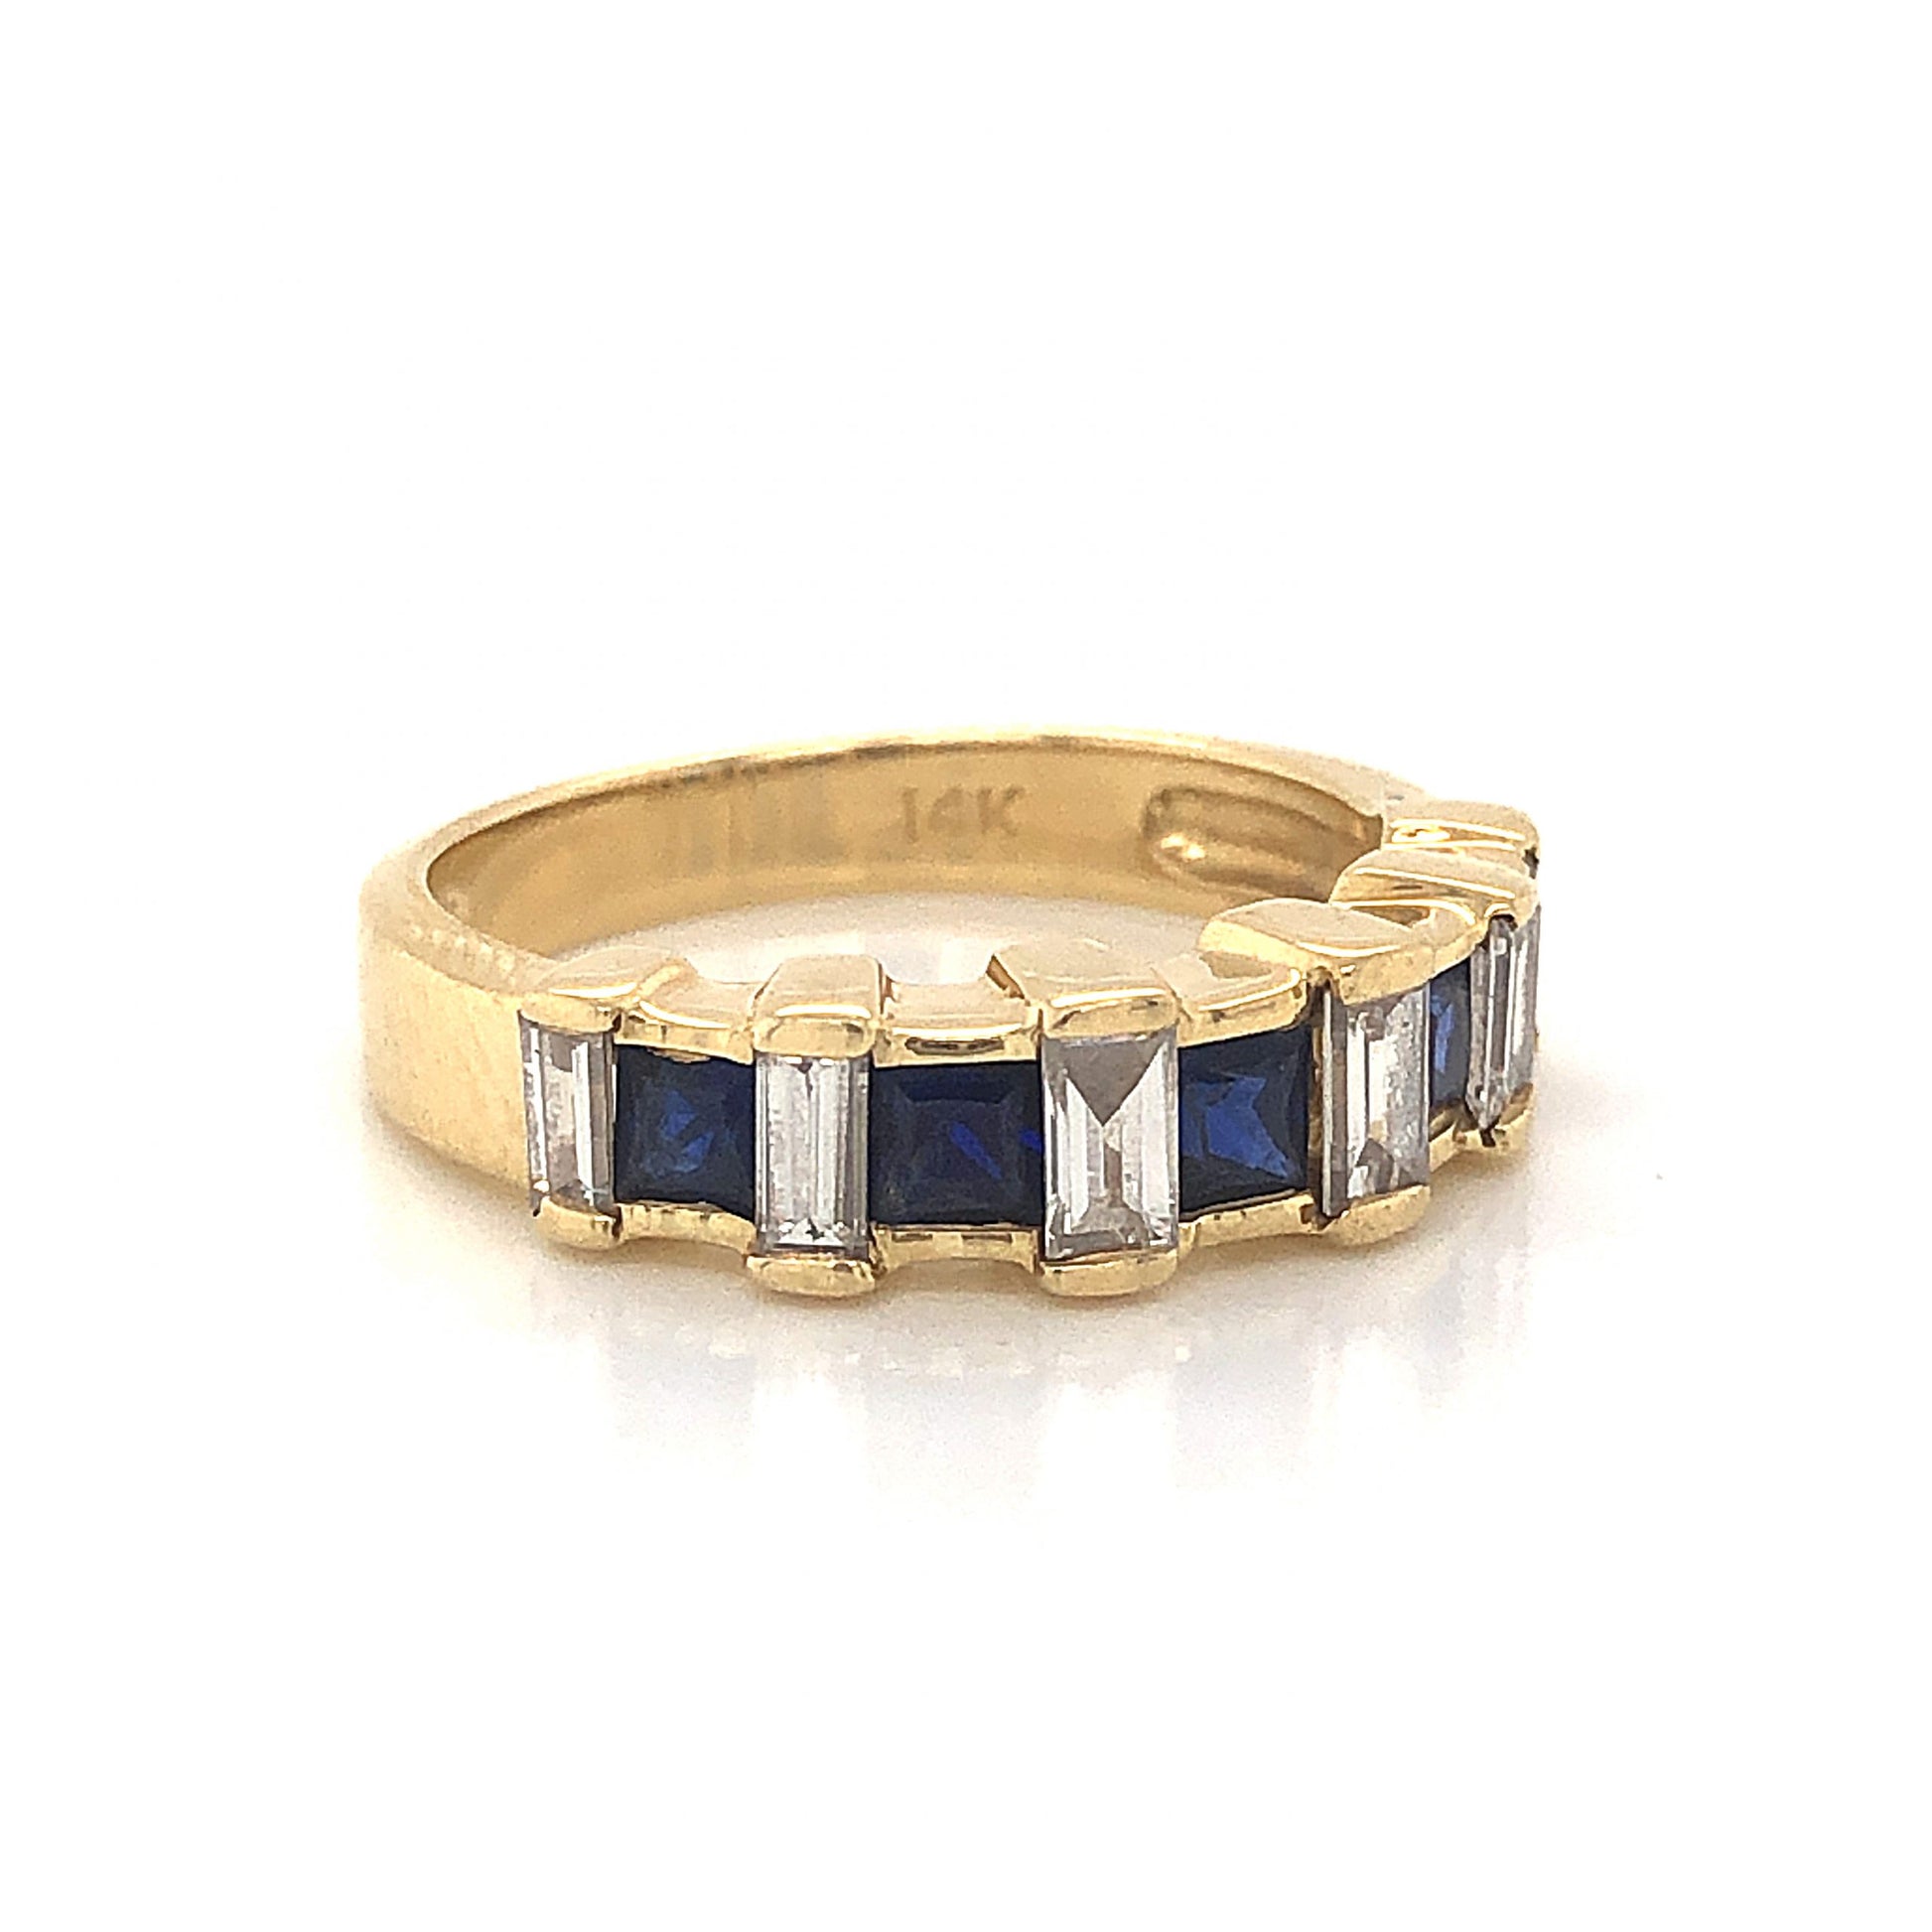 Sapphire & Baguette Diamond Wedding Band in 14k Yellow GoldComposition: 14 Karat Yellow Gold Ring Size: 5.75 Total Diamond Weight: .84ct Total Gram Weight: 3.8 g Inscription: 14k
      